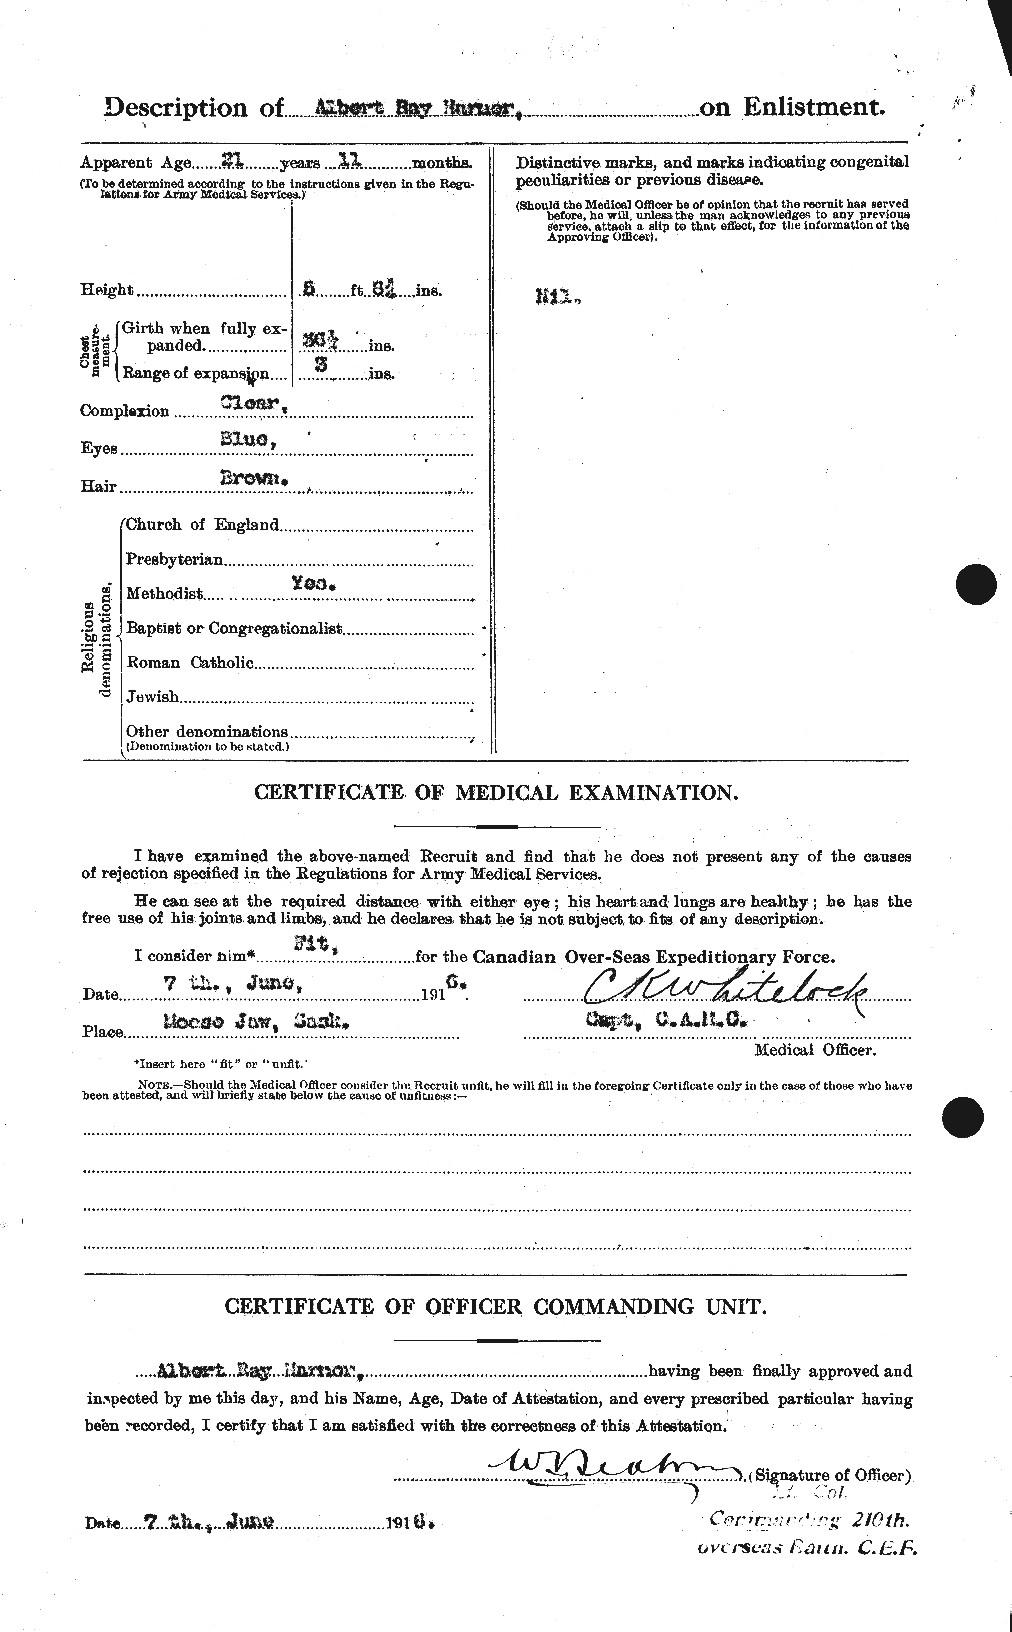 Personnel Records of the First World War - CEF 378853b